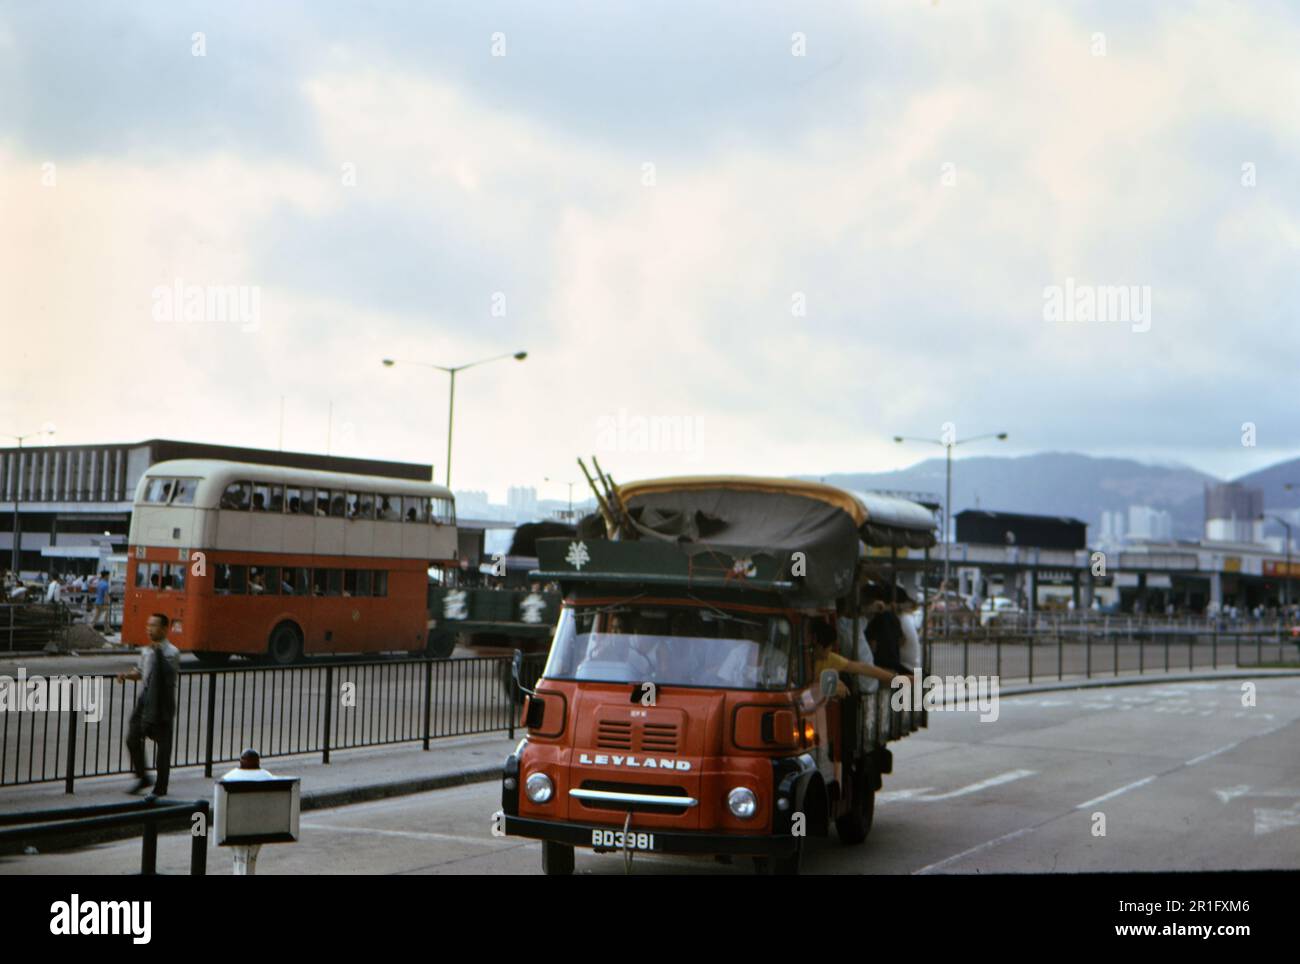 Public transportation in Hong Kong, double decker bus and Leyland small truck vehicle ca. 1973 Stock Photo